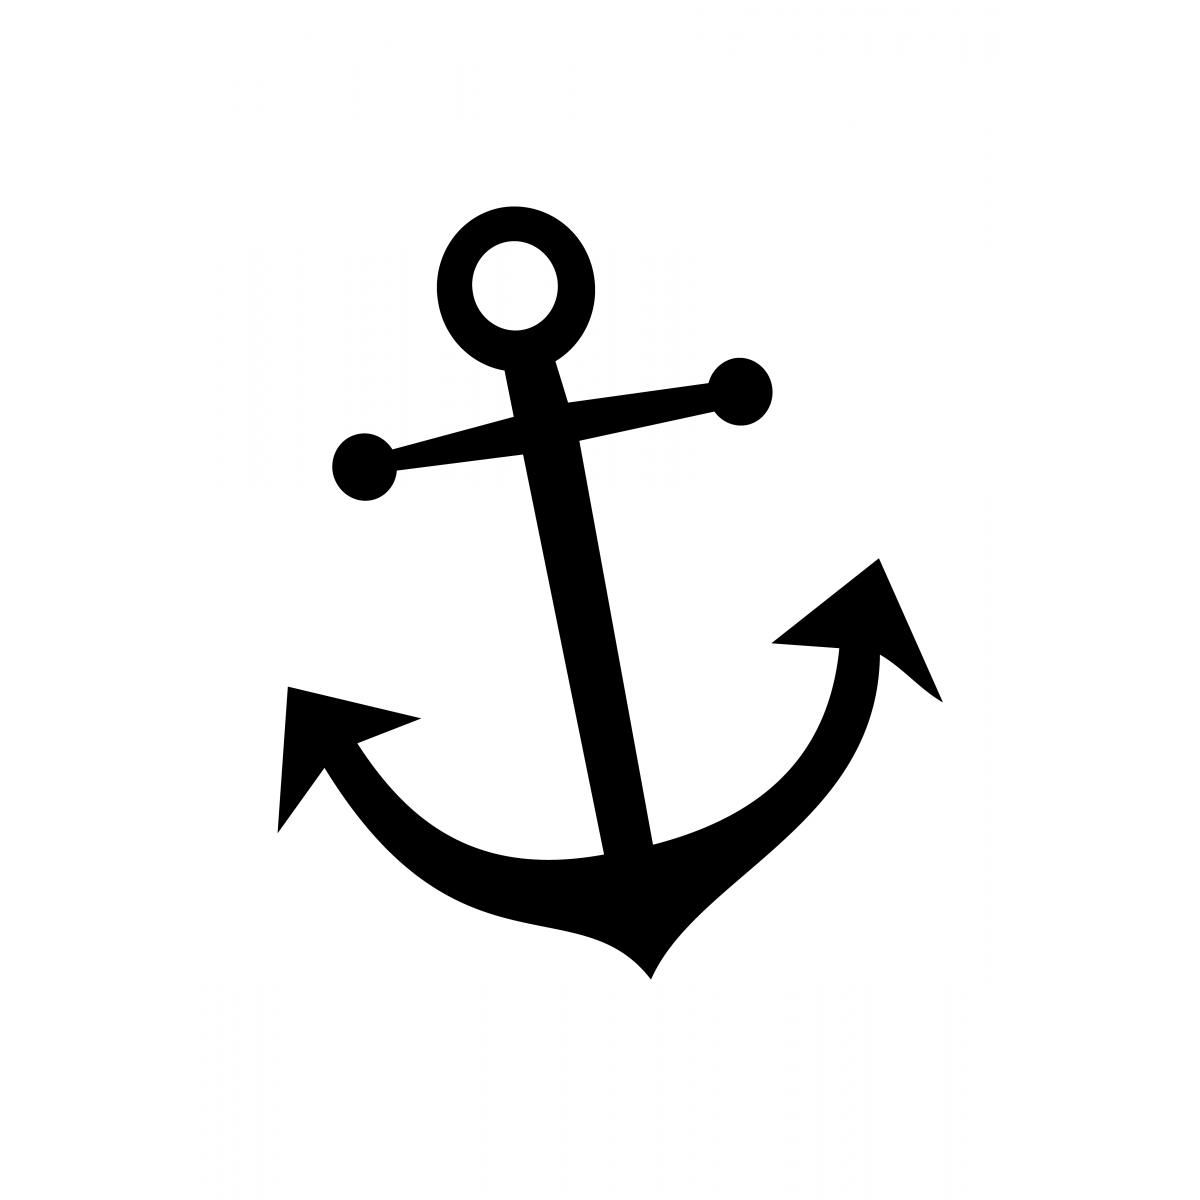 Free Simple Anchor Cliparts, Download Free Clip Art, Free